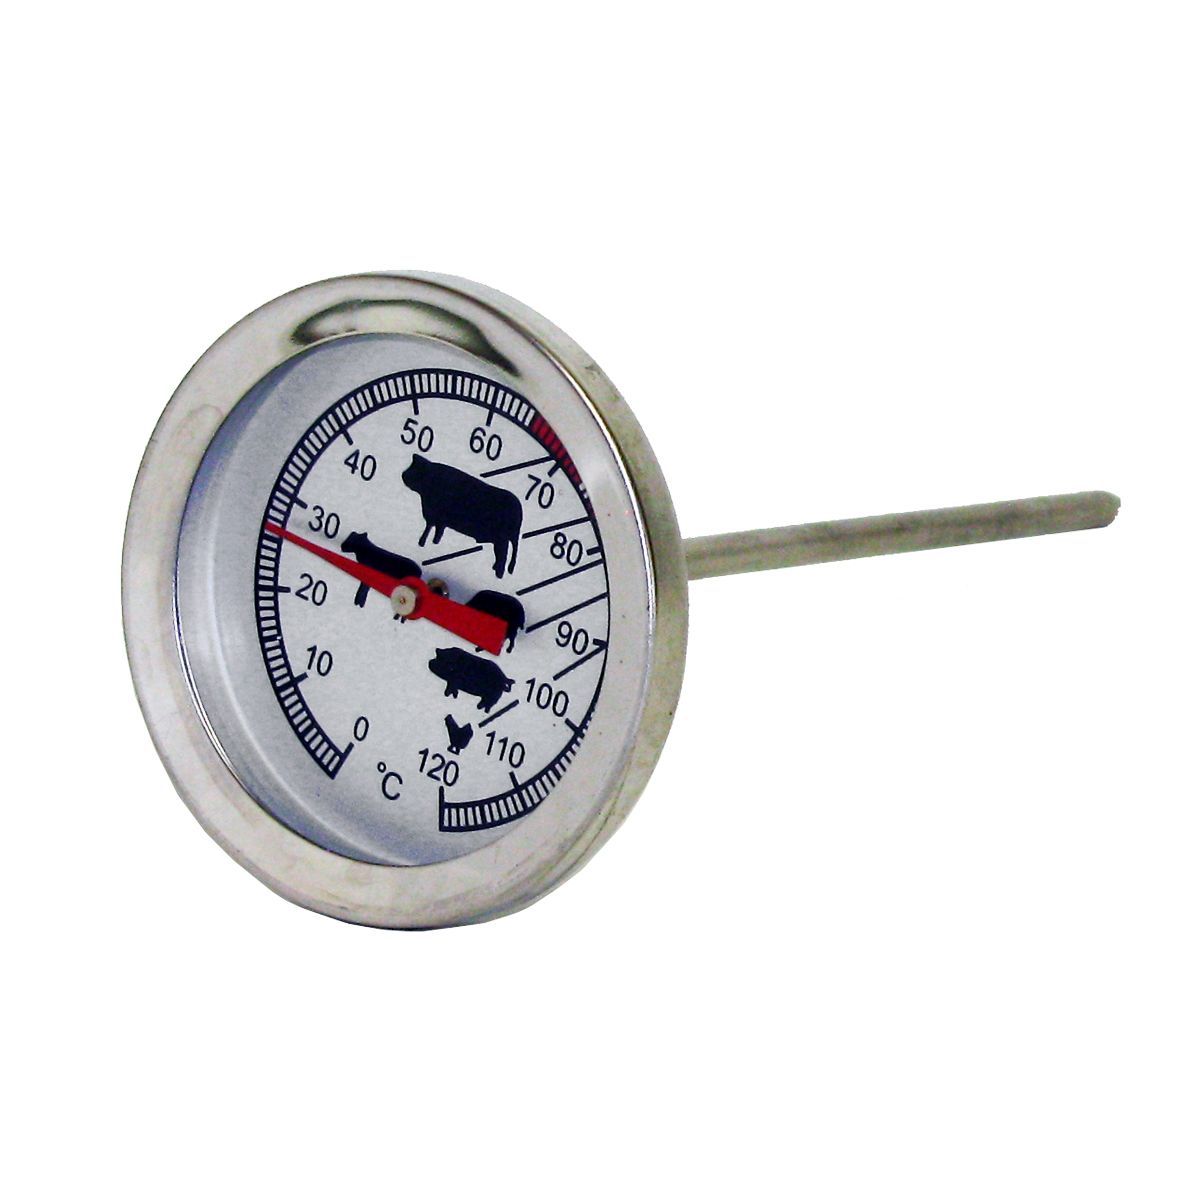 Digital Thermometer 0 ° C - 120 ° C for Baking OTHERS